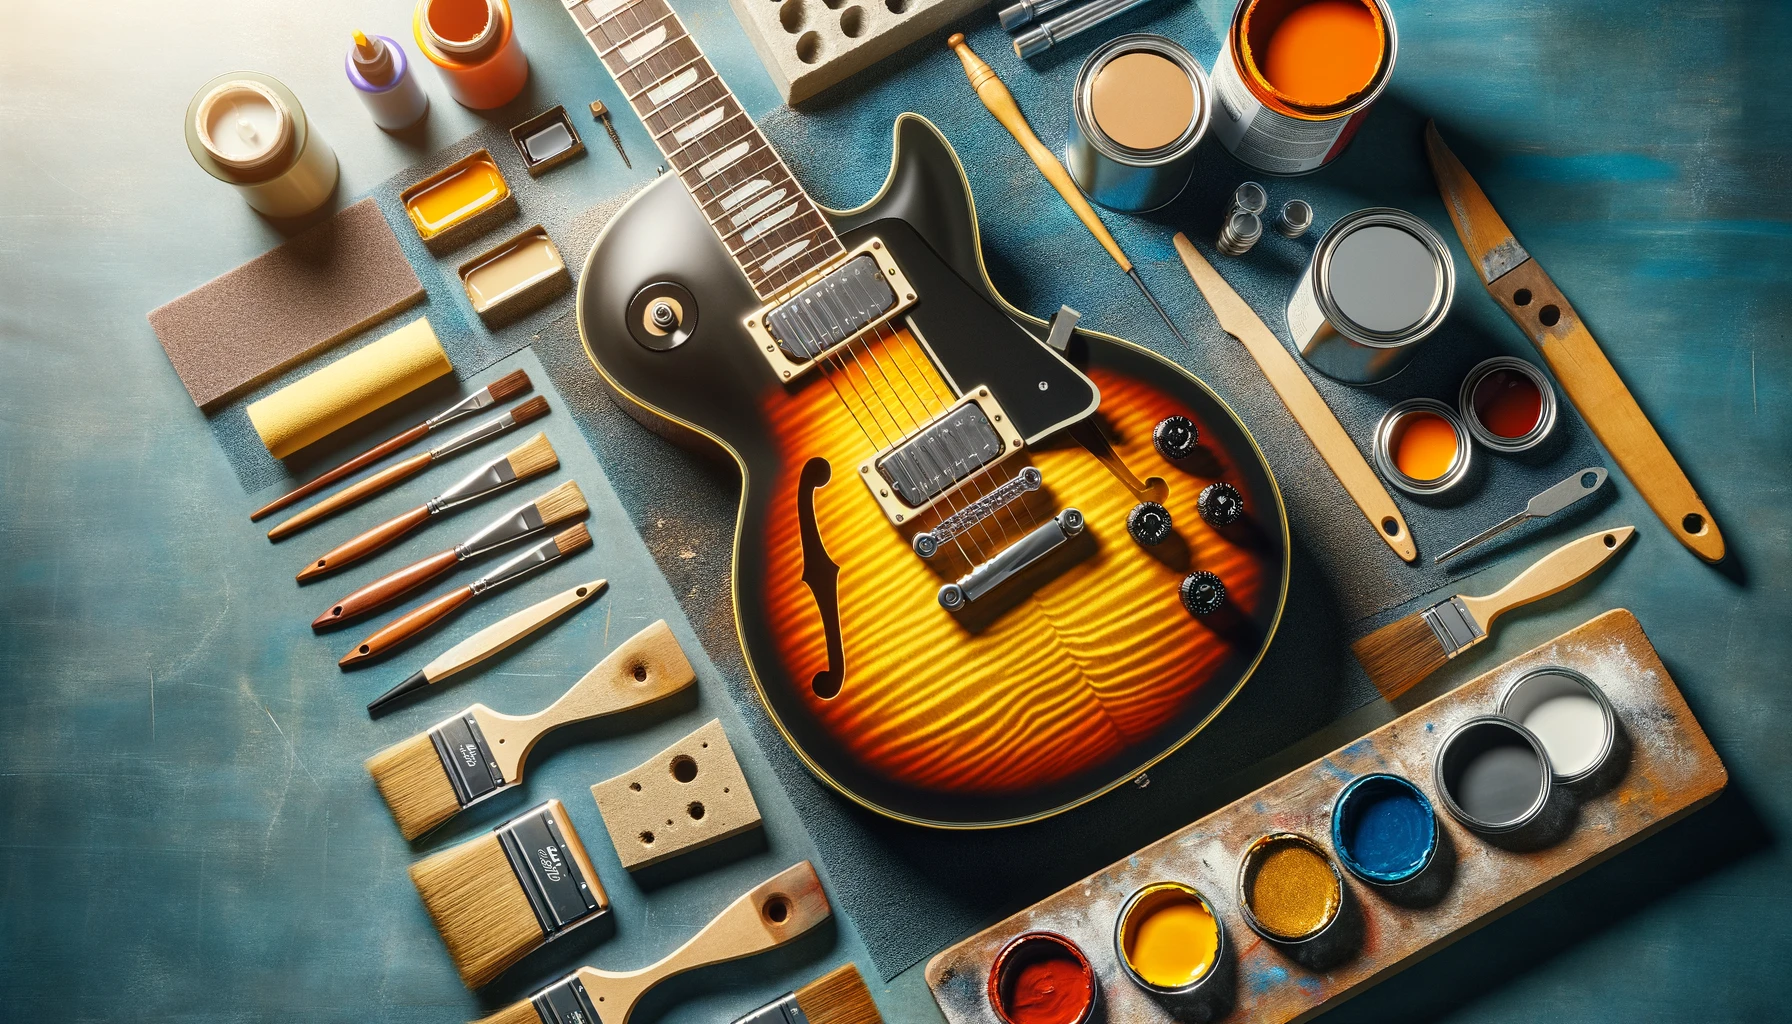 A guitar being paint, with all the tools needed around.